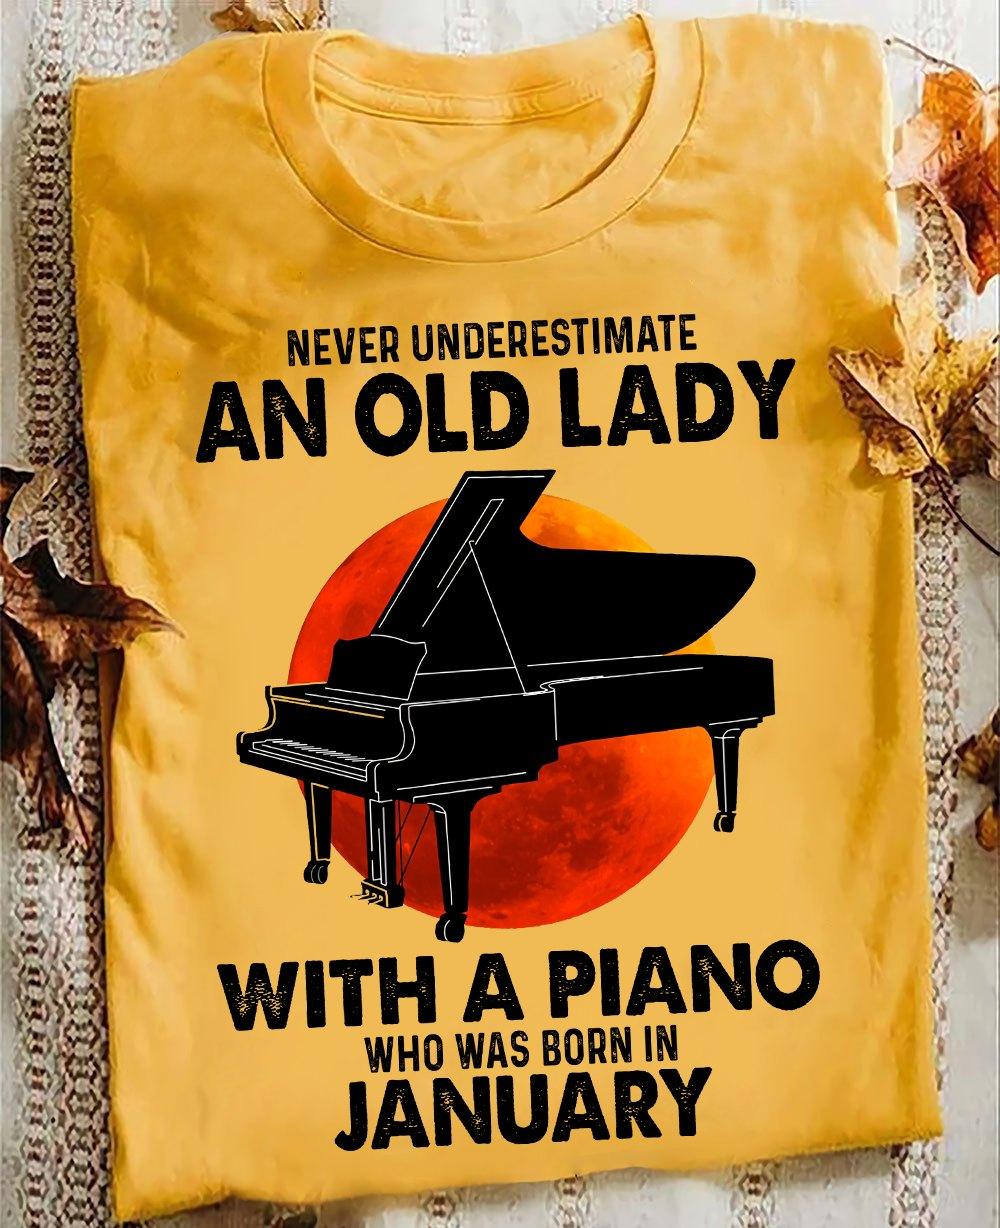 Never underestimate an old lady with a piano who was born in January - Gift for pianist